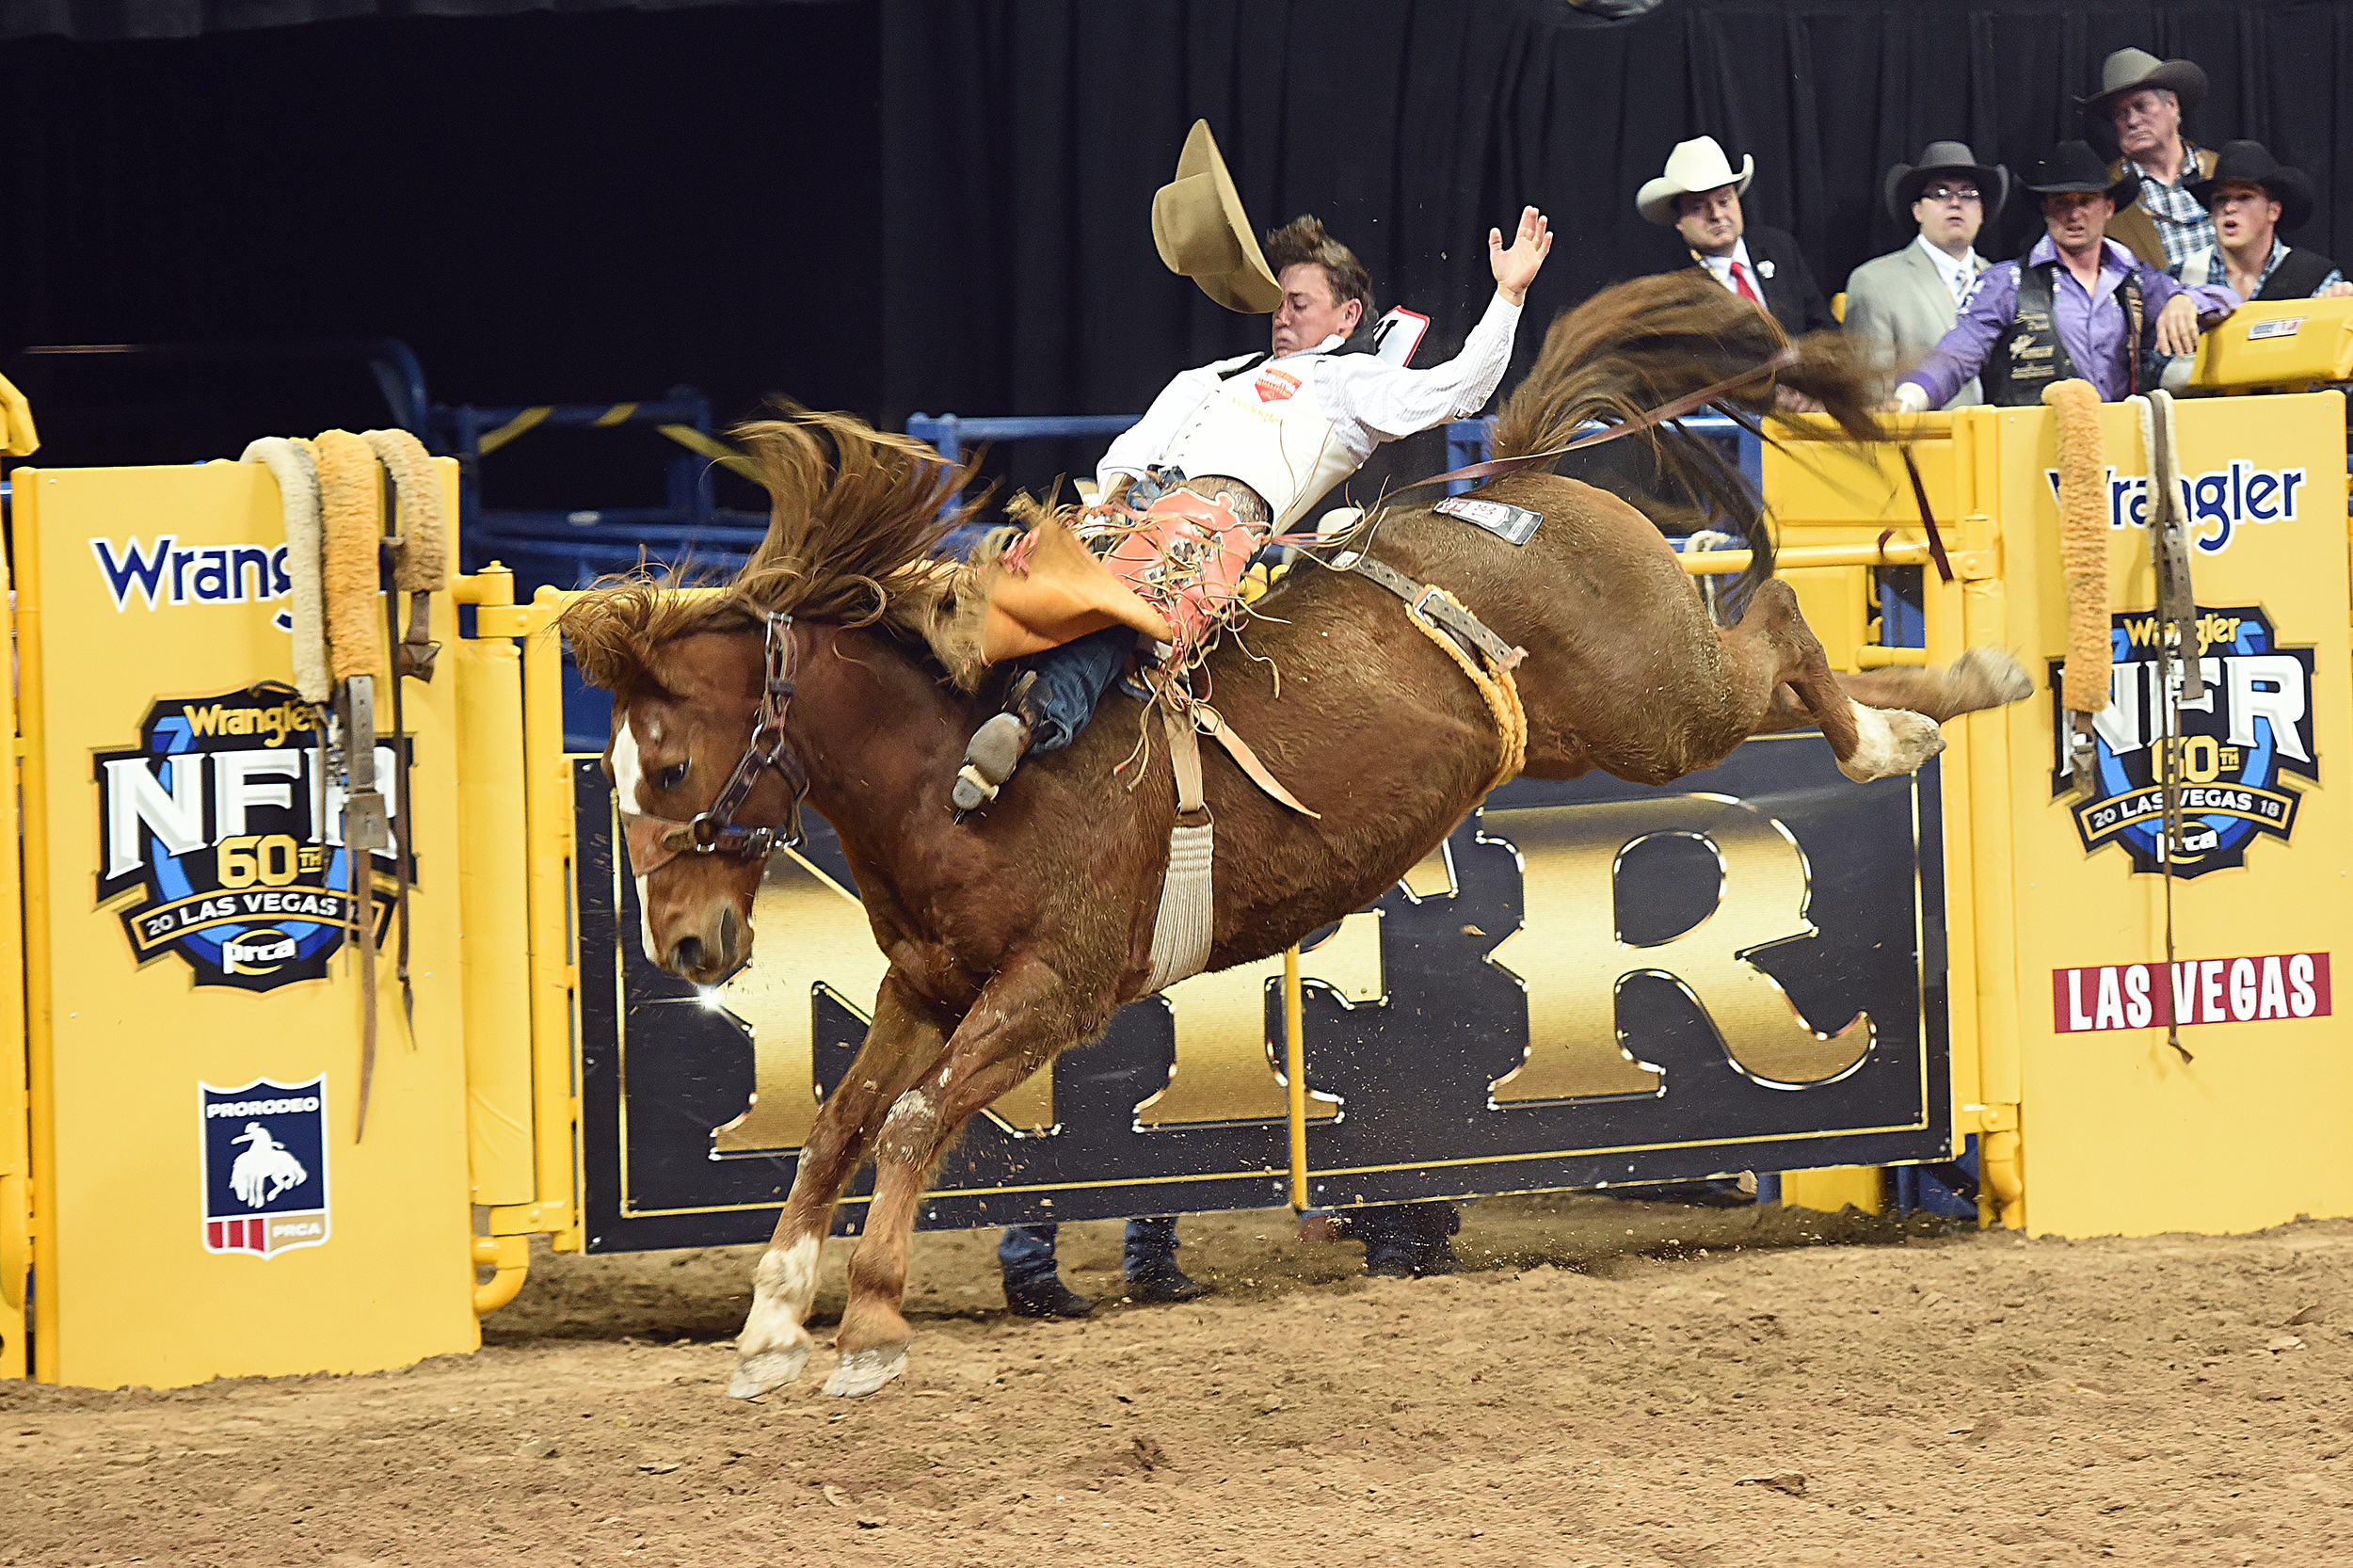 Clayton Biglow rides Frontier Rodeo's Tip Off for 86.5 points to finish third in Friday's second round of the National Finals Rodeo. (PHOTO BY ROBBY FREEMAN)